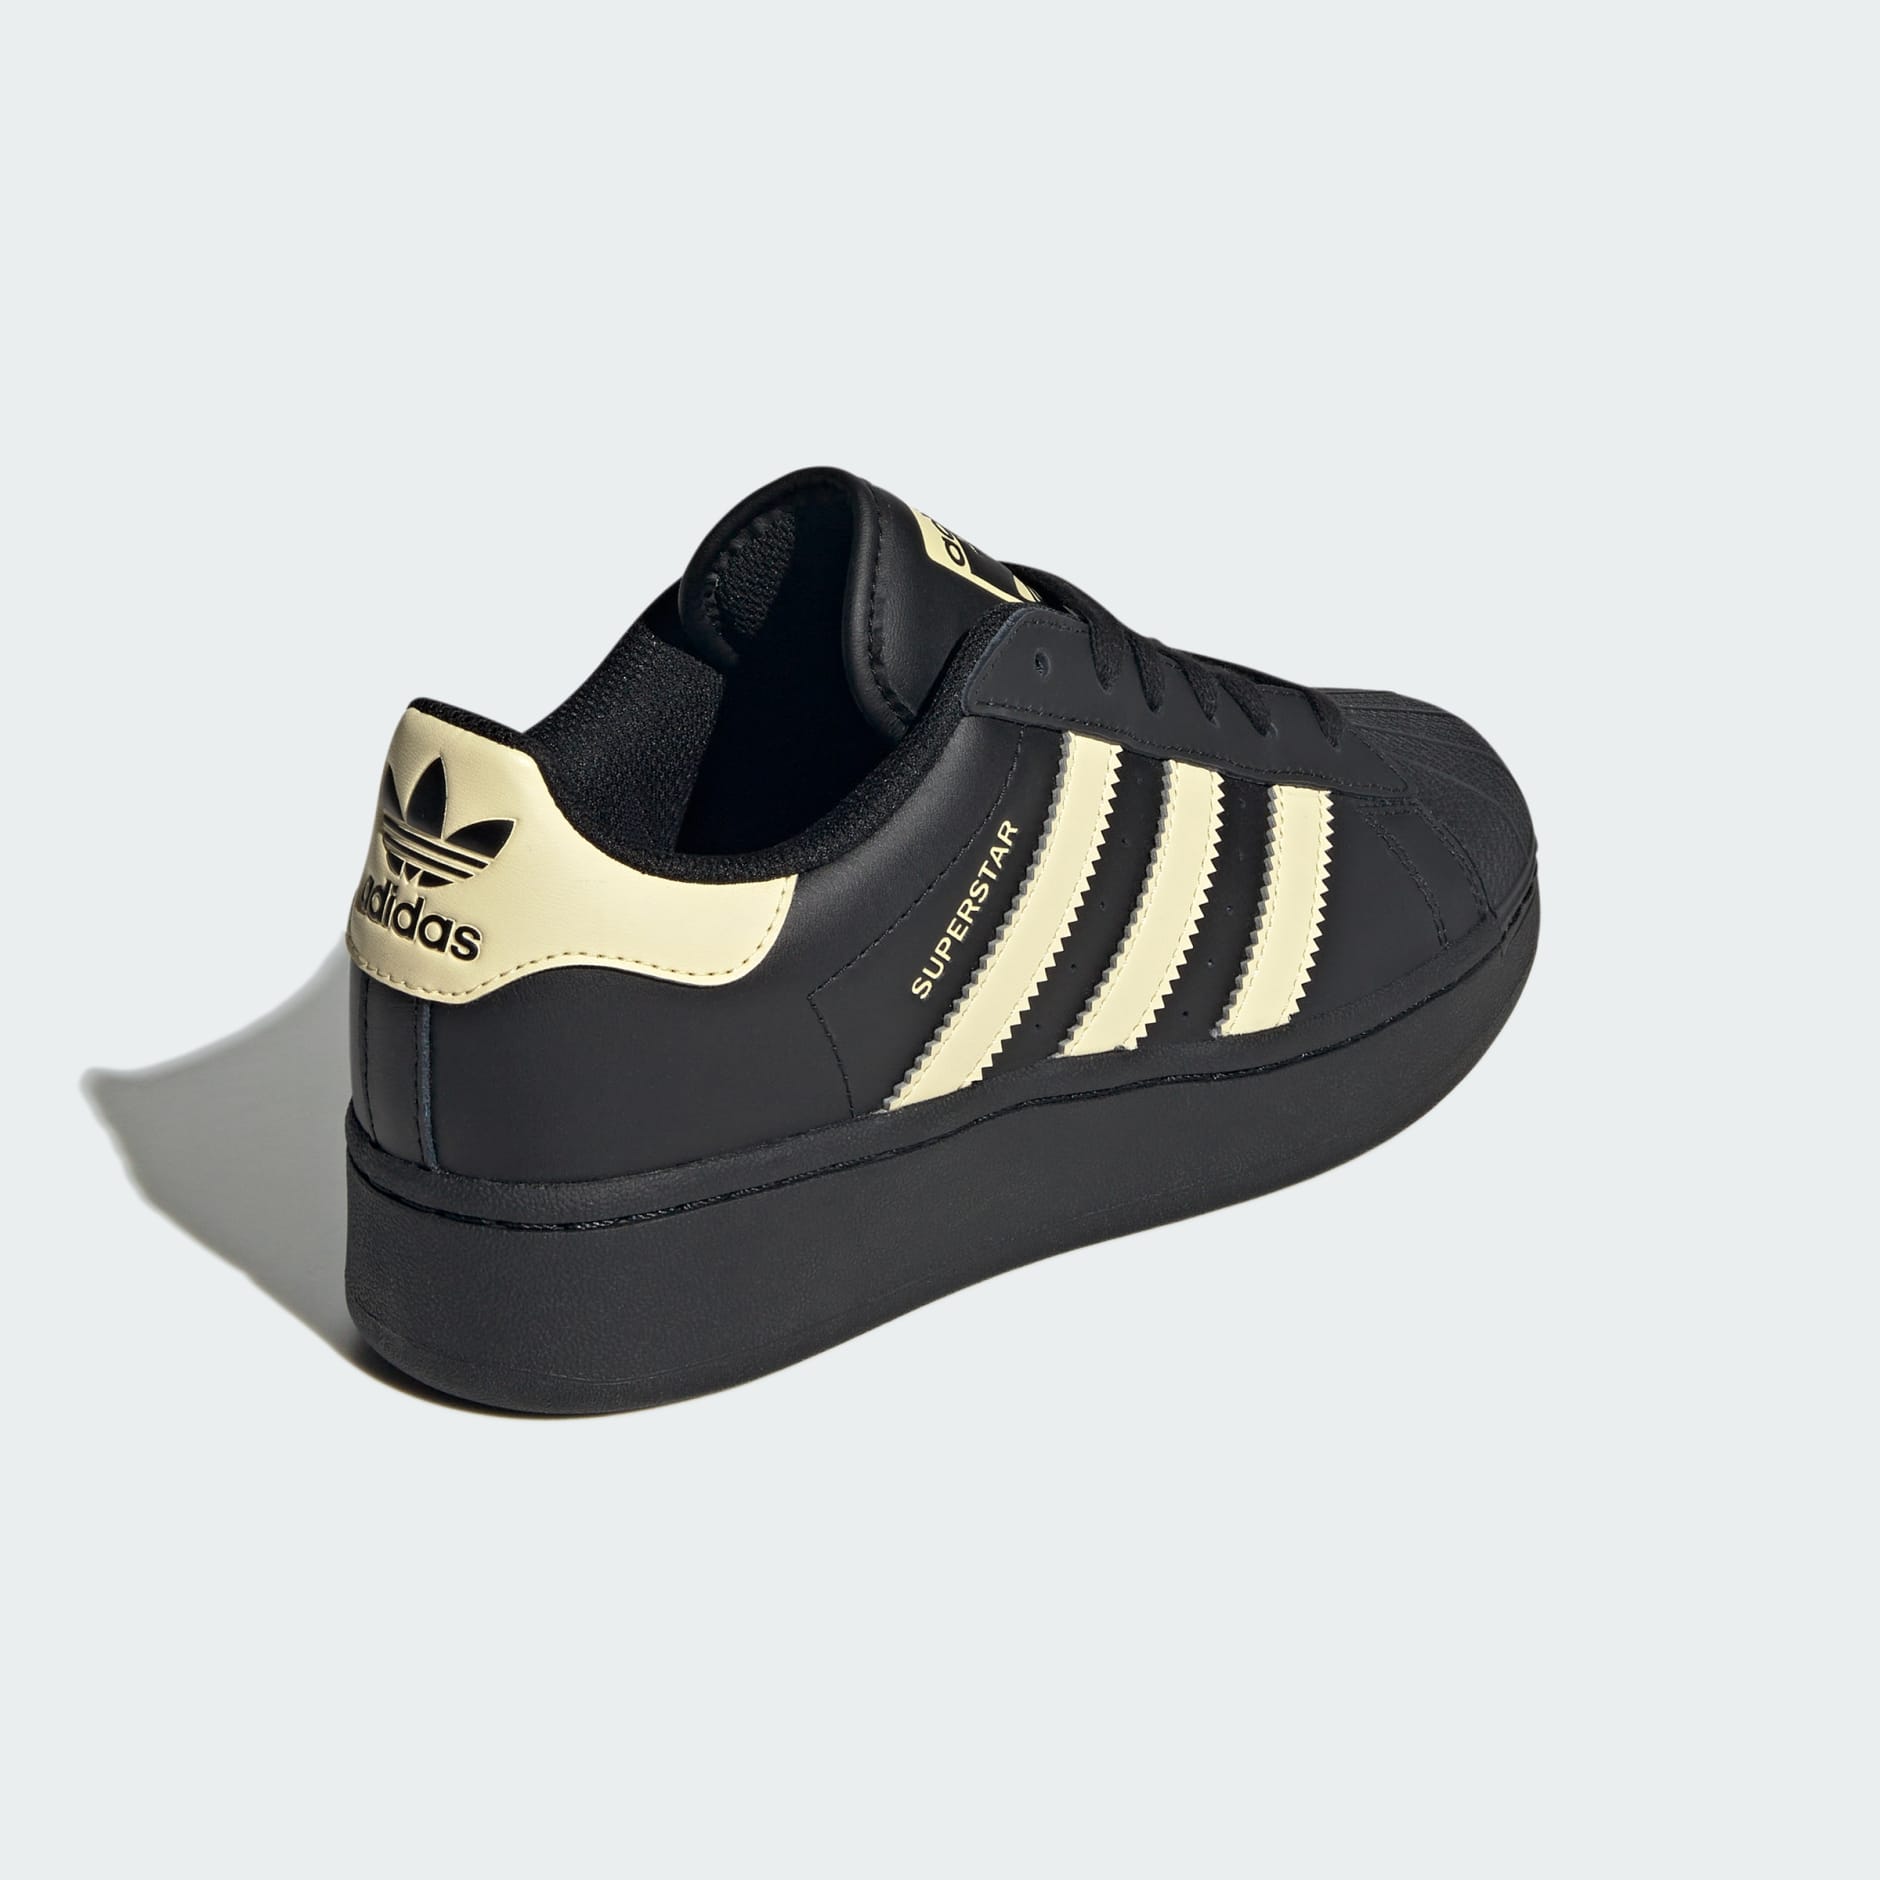 Women's Shoes - Superstar XLG Shoes - Black | adidas Kuwait